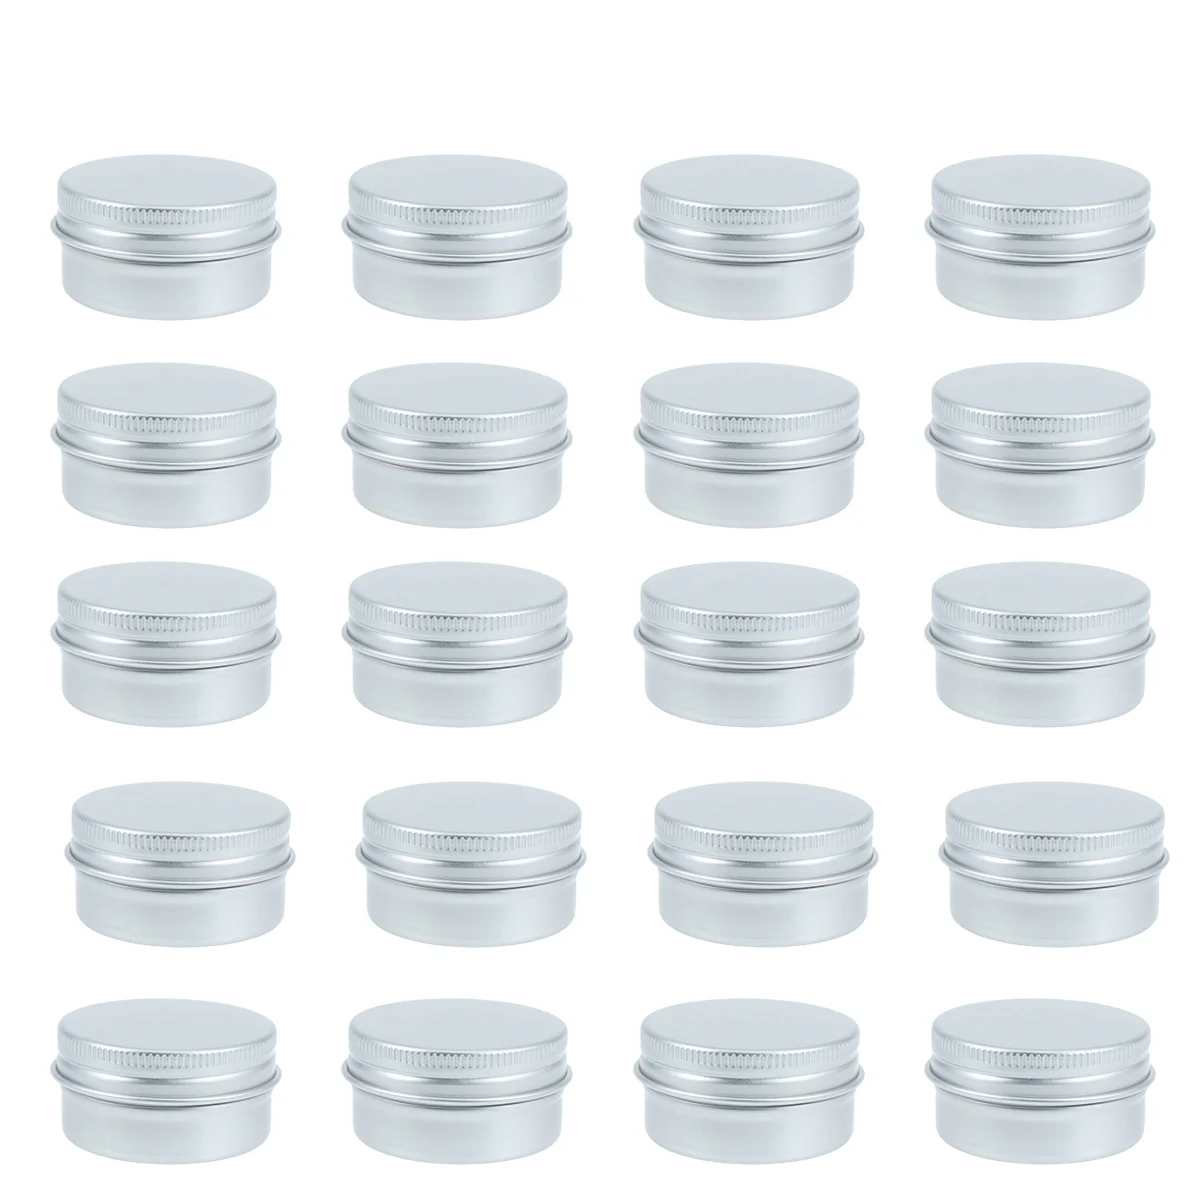 

20pcs Aluminum Tin Cans Empty Travel Jars Containers with Lids for Makeup Lotion Lip Balm and Cosmetics 20ml Powder